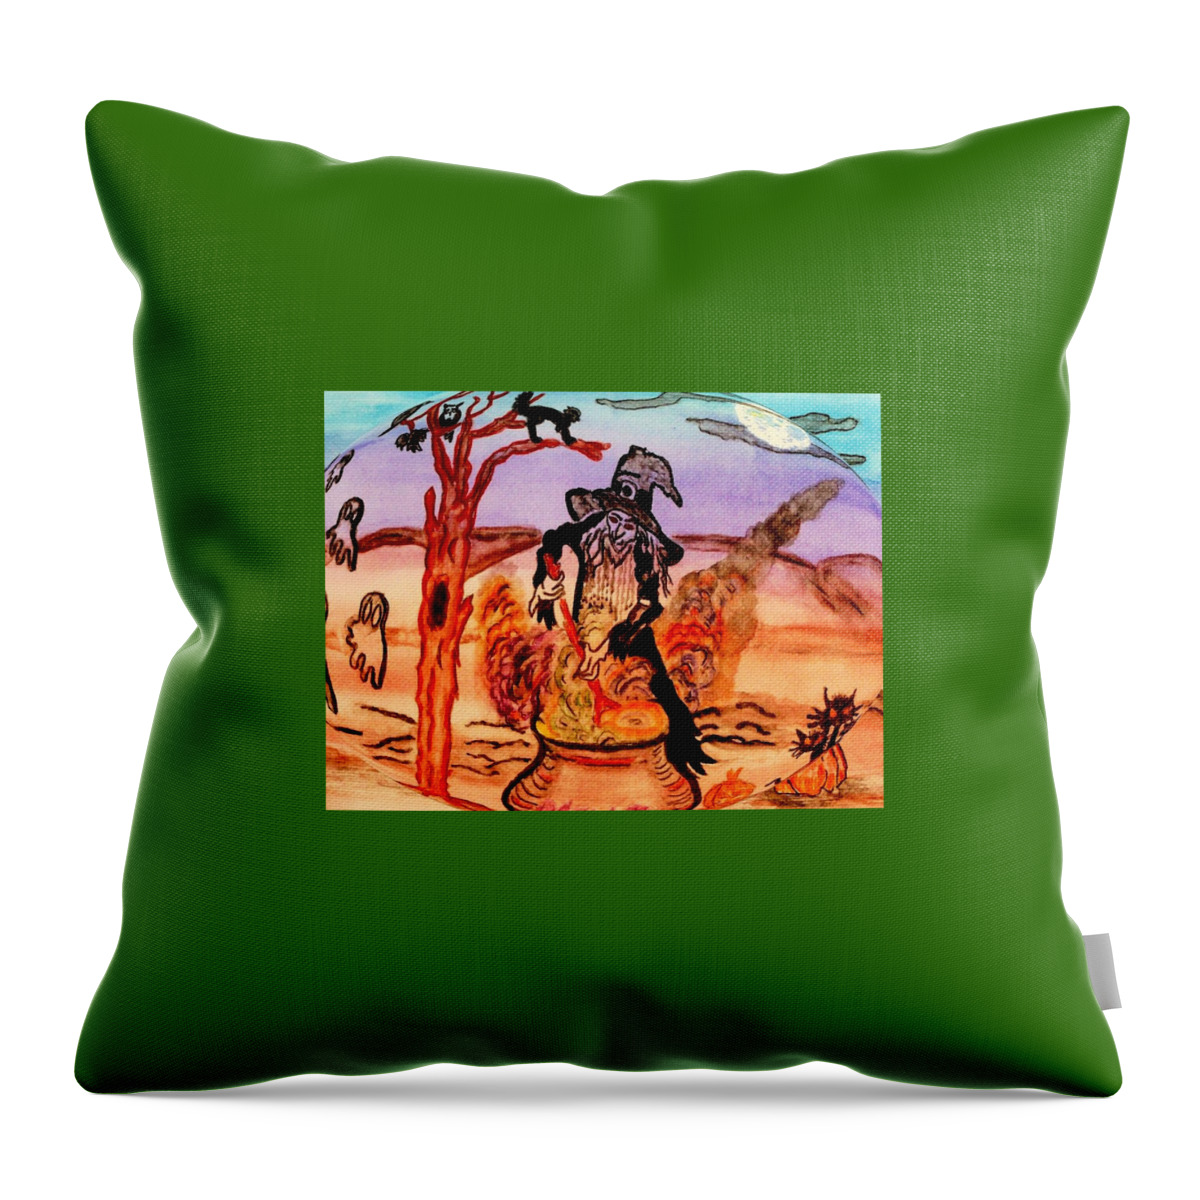 Howloween Throw Pillow featuring the painting Witches Brew by Connie Valasco